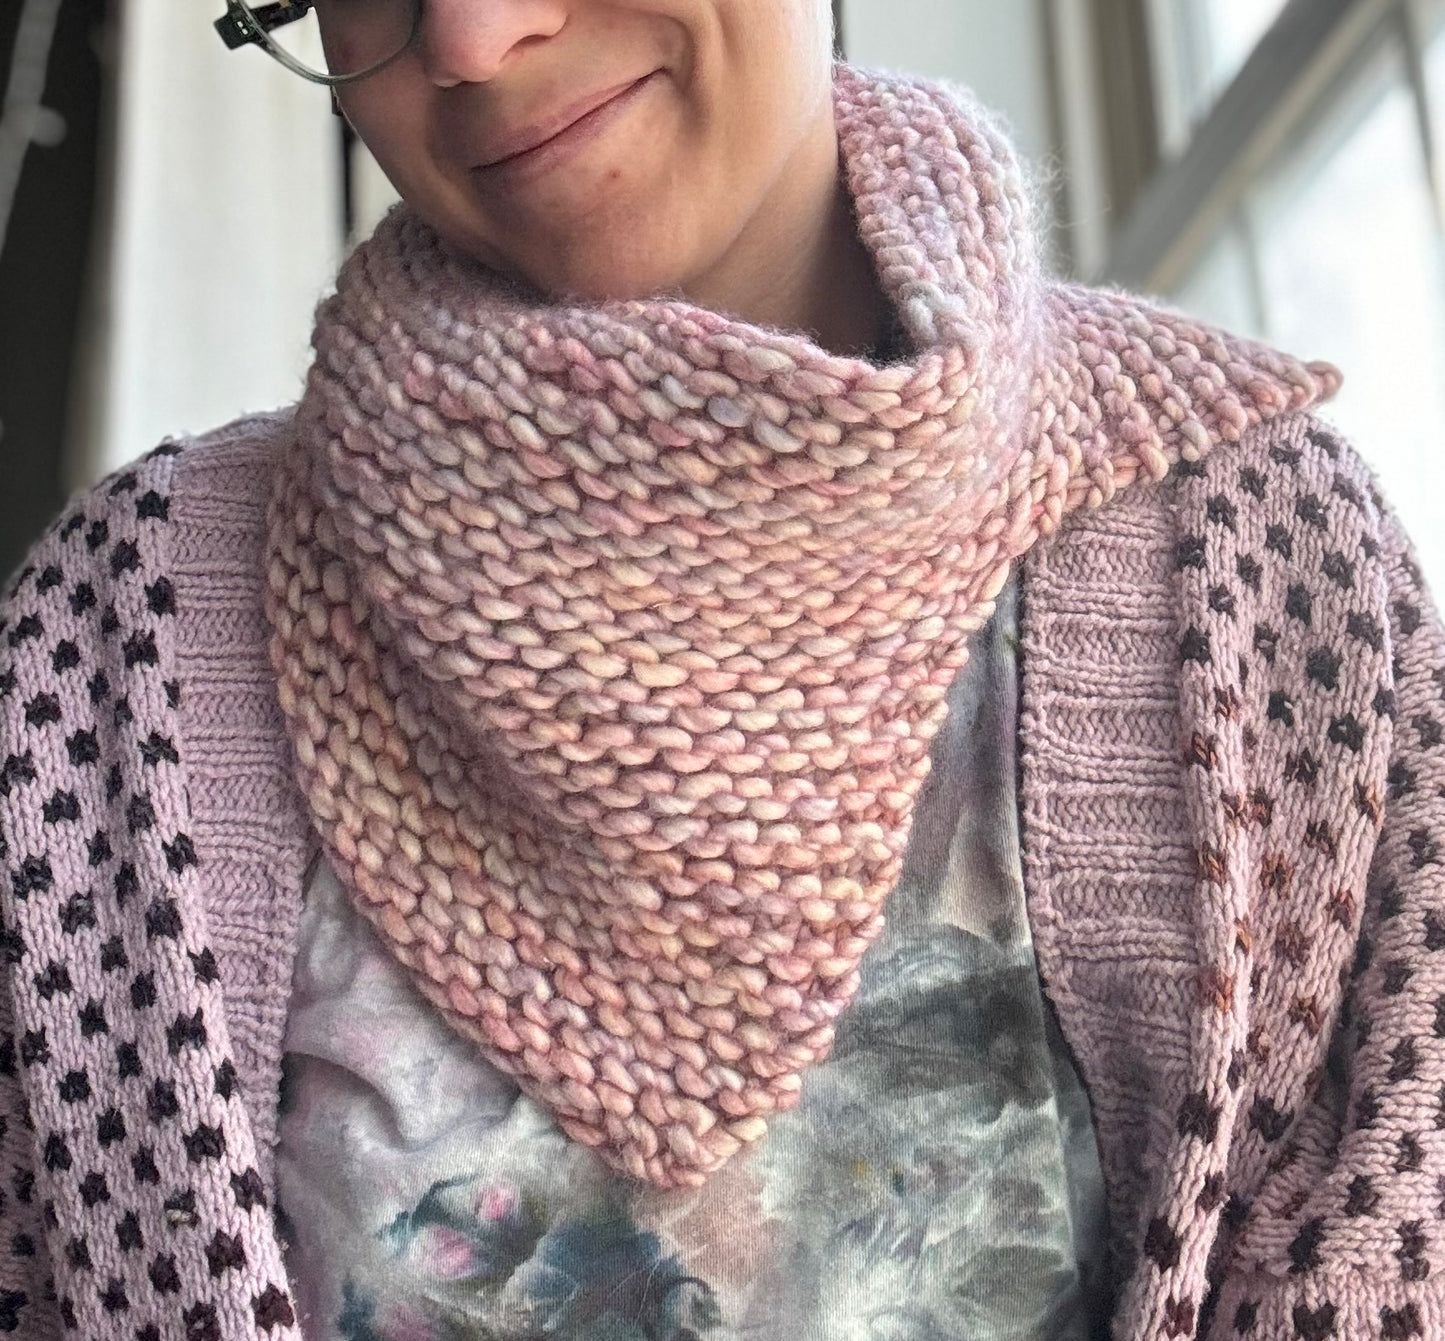 Chonky Knit Cowl Workshop (with Connected Stitches)